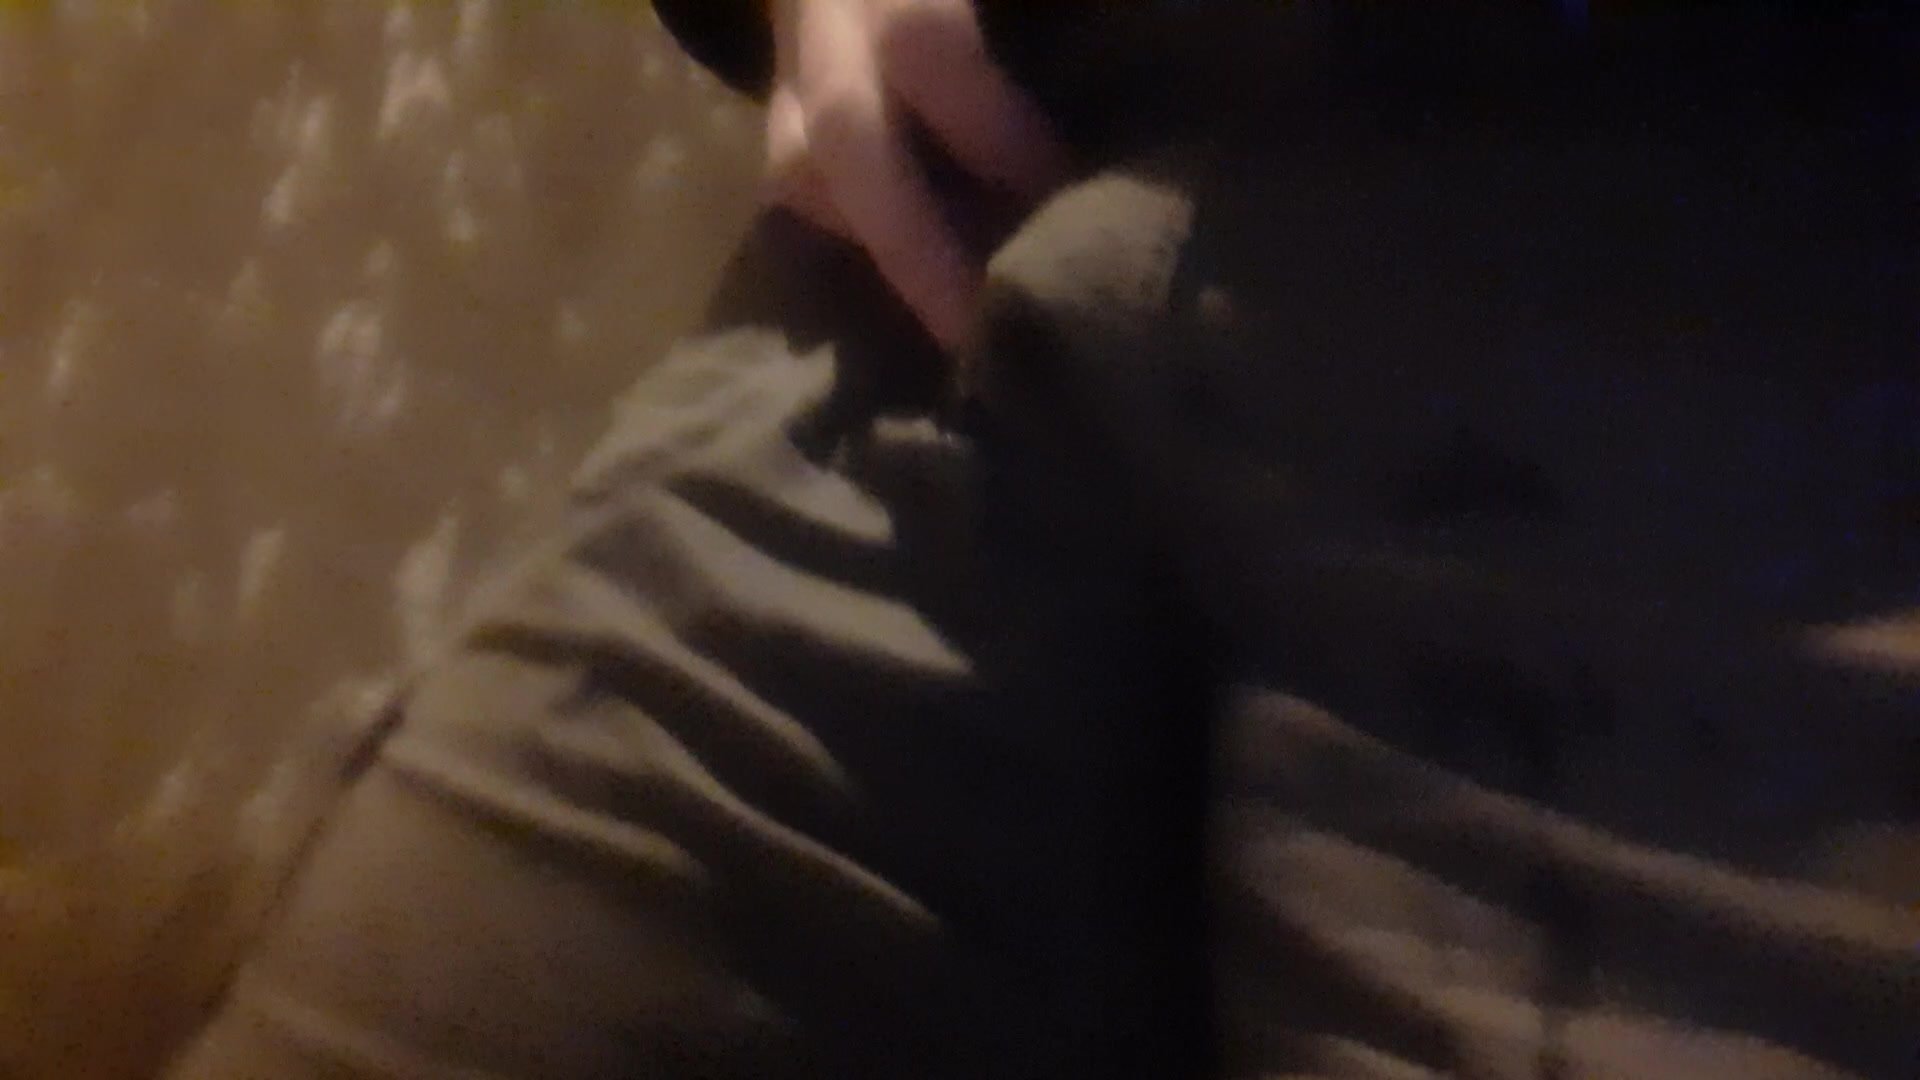 Pissing in pants - video 3